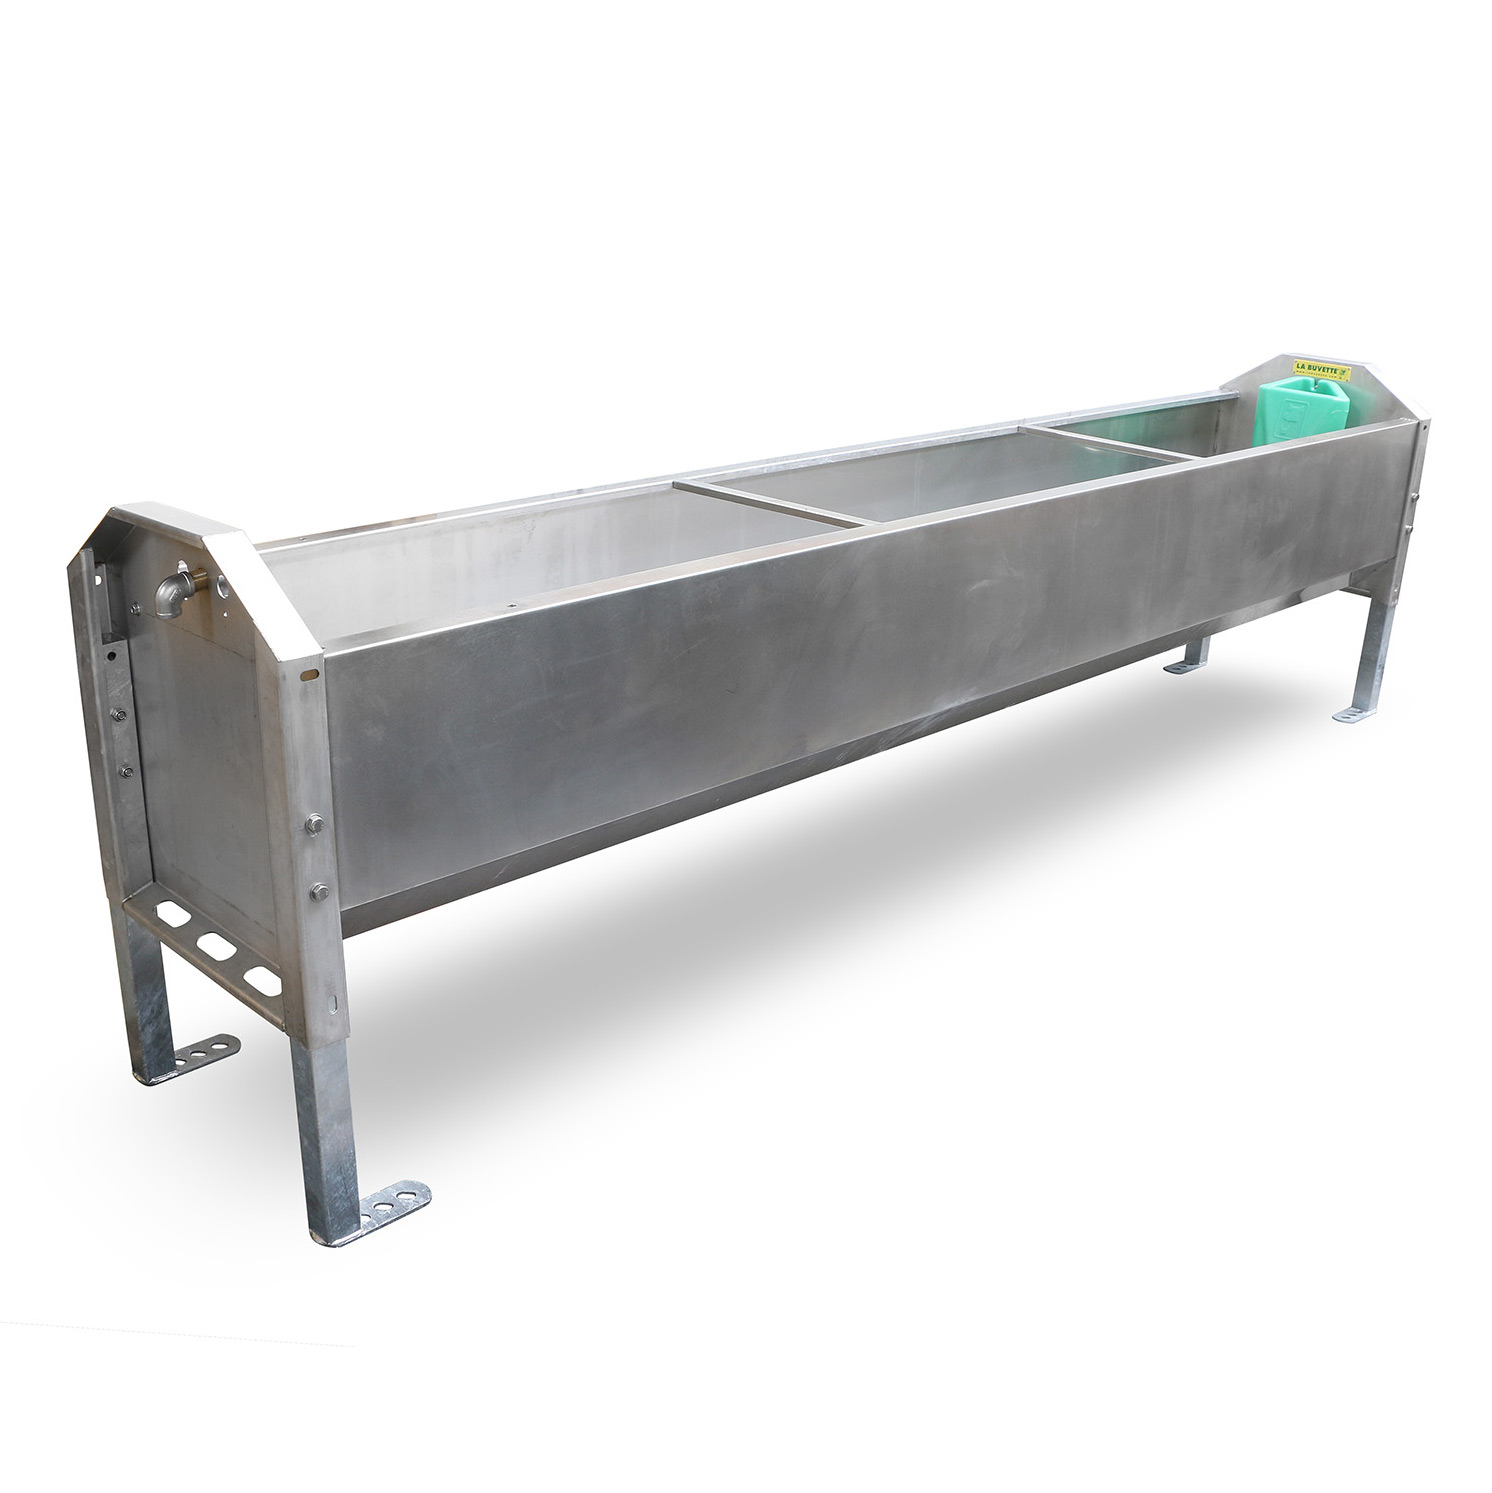 DAIRYNOX 600 LARGE STAINLESS-STEEL Trough for pre-cooler